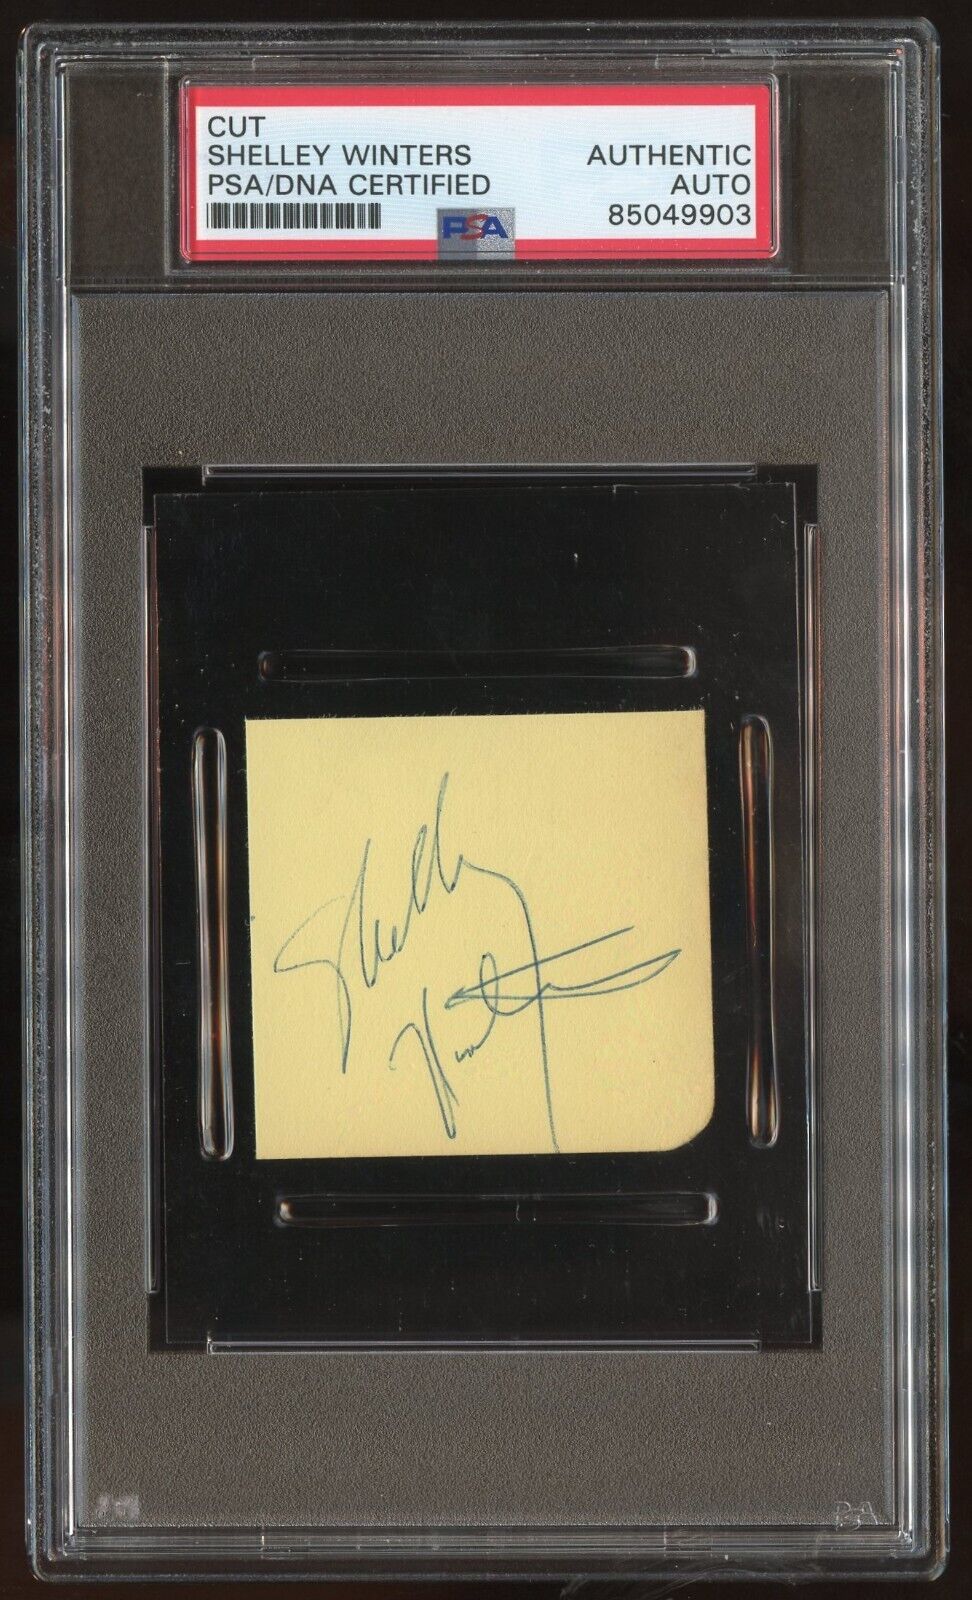 Shelley Winters d2006 signed 2x2 cut autograph American Actress PSA Slabbed